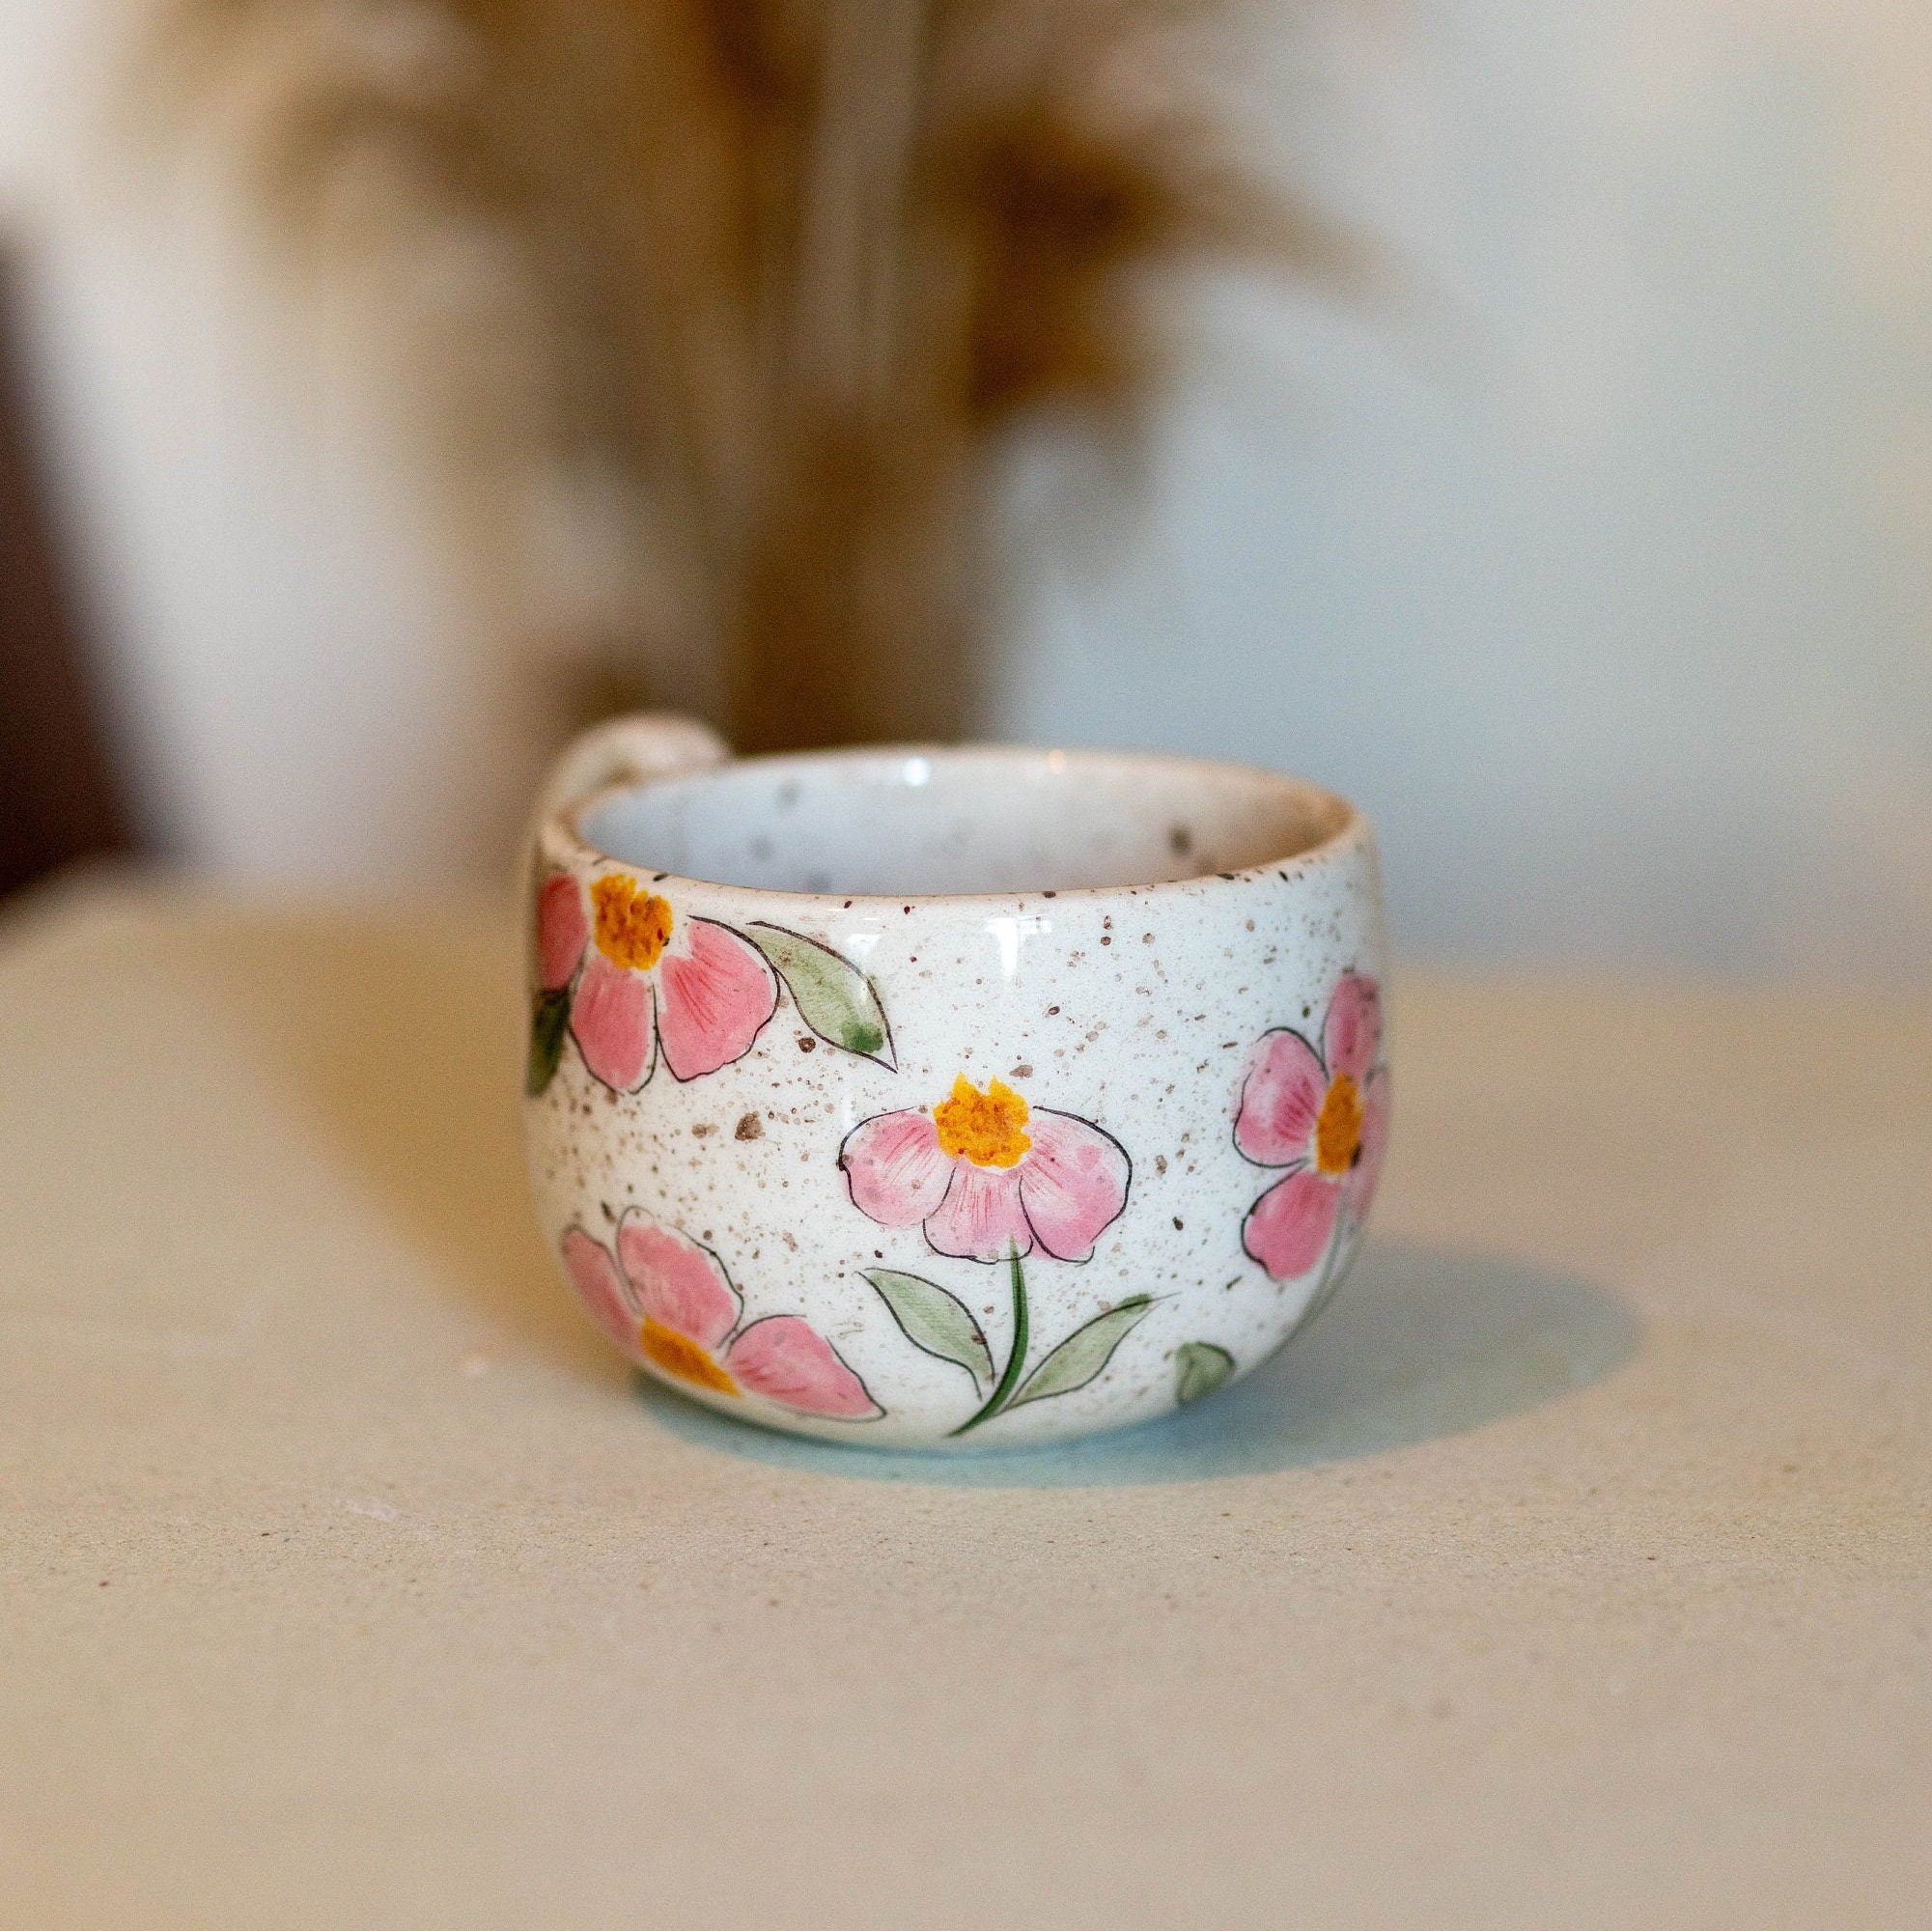 Eccolo Daisies Ceramic Coffee Mug, White and Blue Floral Handpainted  Stoneware Tea Cup with Handles …See more Eccolo Daisies Ceramic Coffee Mug,  White